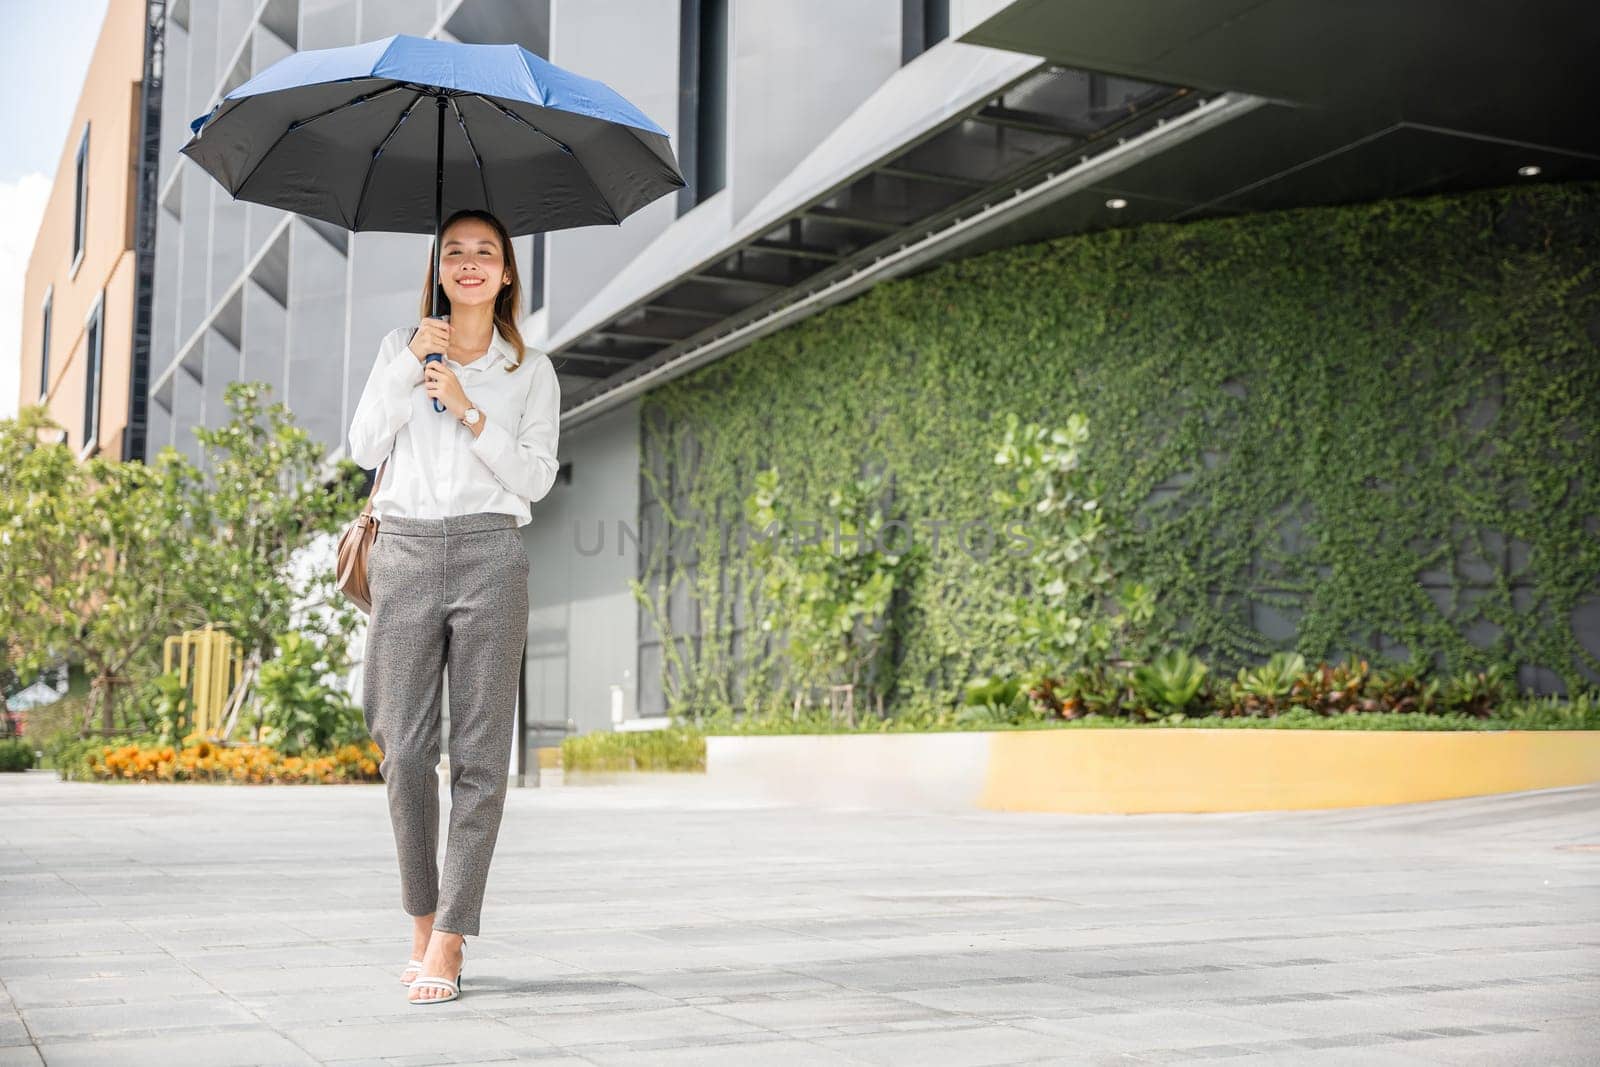 Walking to the office on a hot day, a young businesswoman holds an umbrella to protect herself from the sun rays. Her professional demeanor and makeup reflect her determination and success. by Sorapop